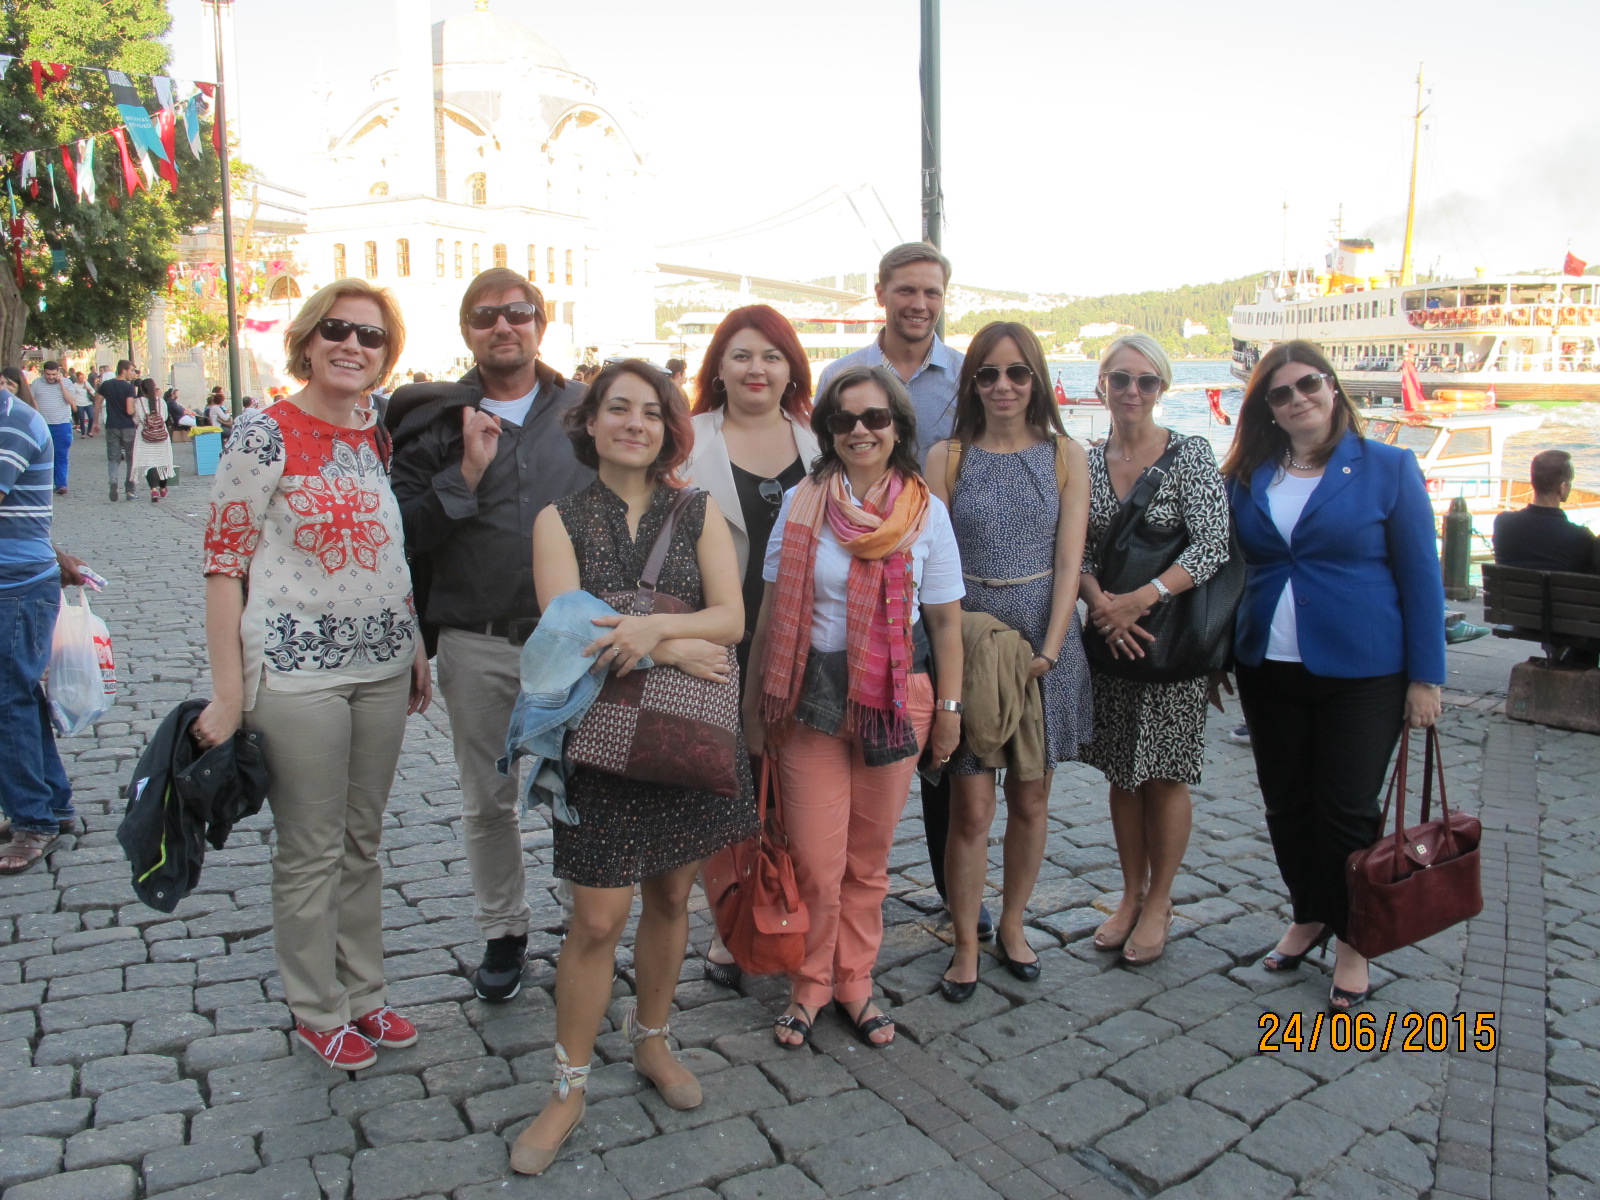 Ortaköy, Sultanahmet and Taksim were visited after the meetings.